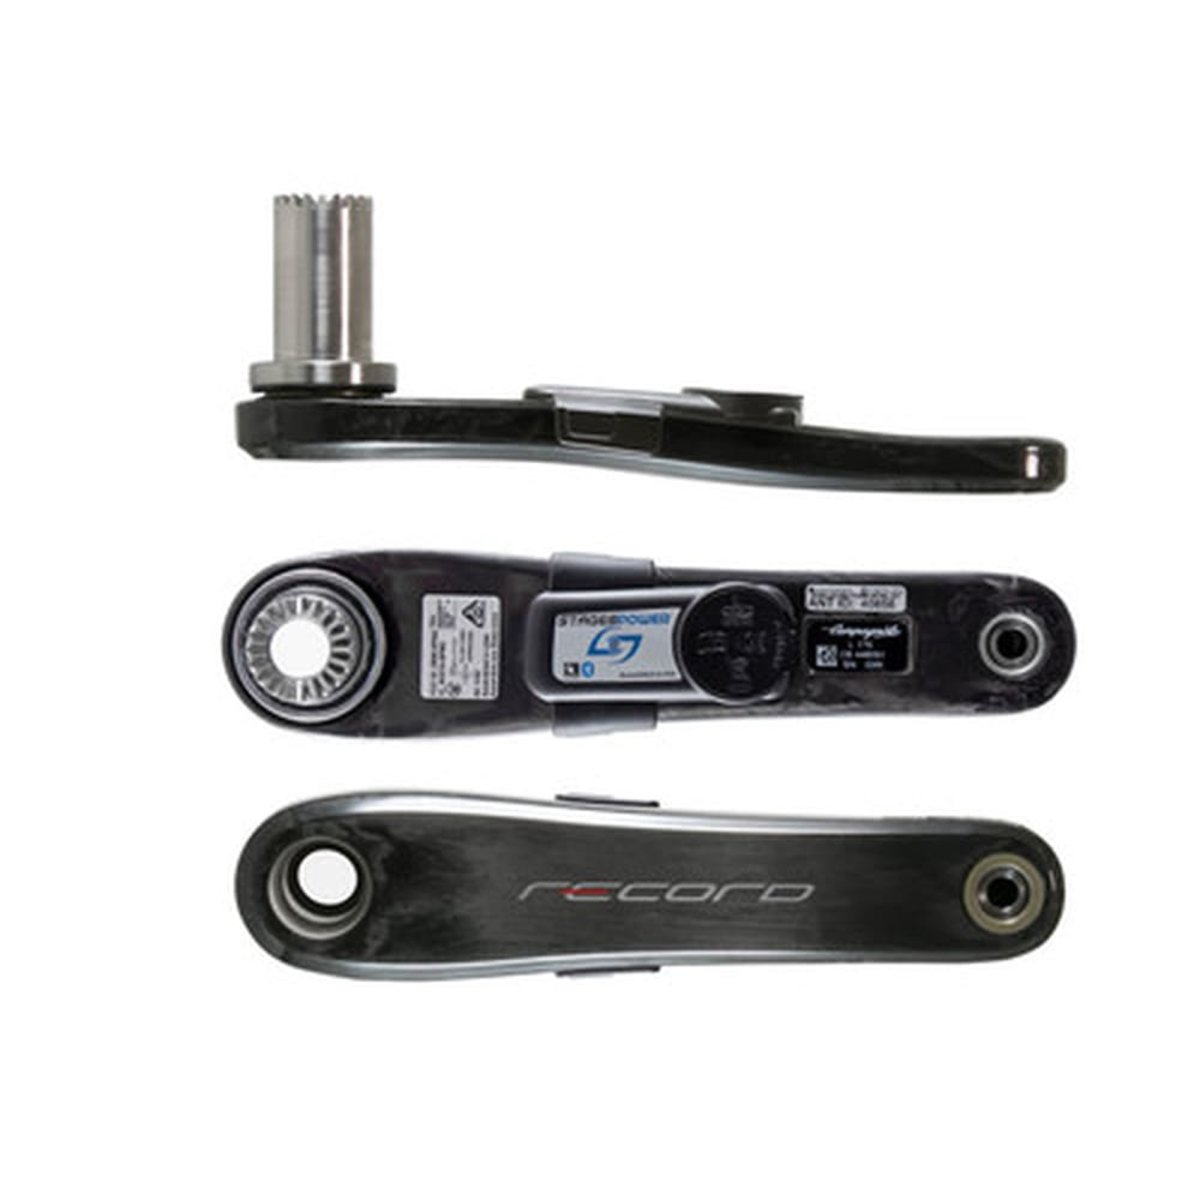 Измеритель мощности STAGES Cycling Power Meter L Campagnolo Record 12 Speed 172,5mm фото 